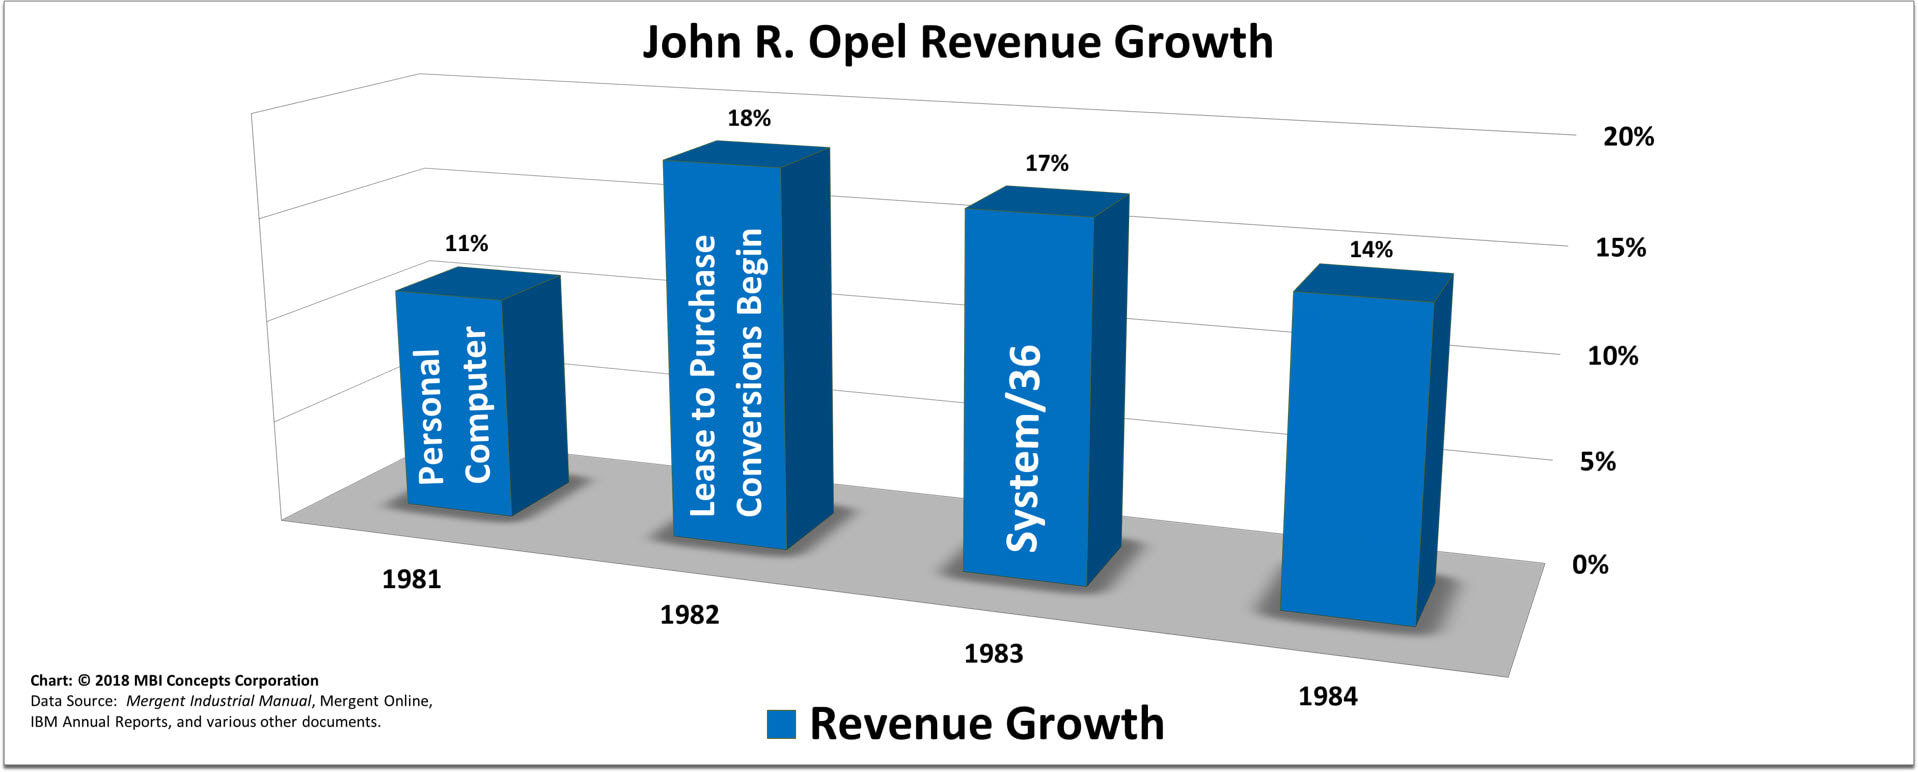 A color bar chart showing IBM's yearly revenue growth from 1981 to 1984 for John R. Opel.